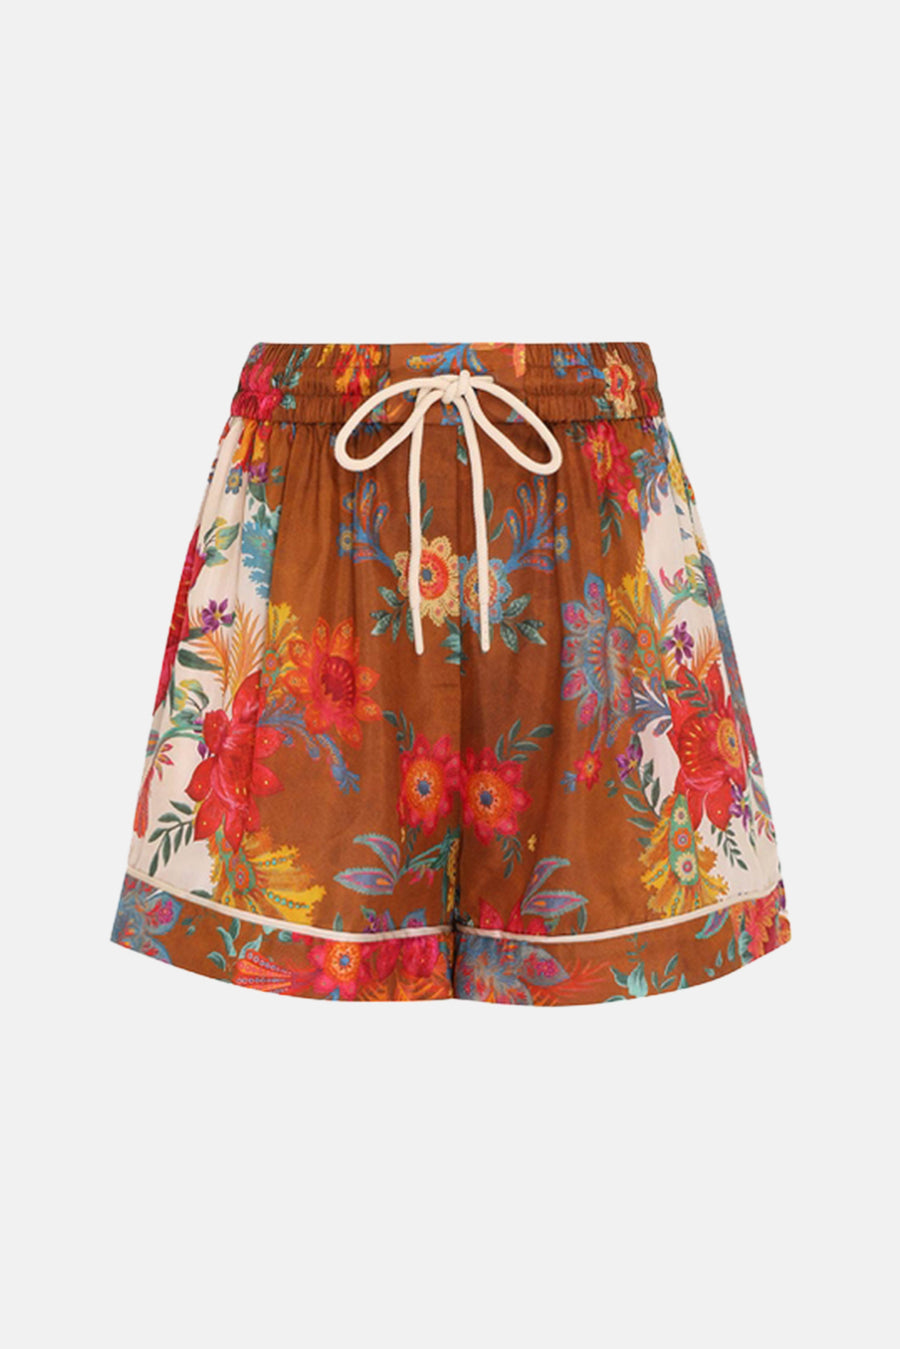 Ginger Relaxed Short Cream/Brown Floral